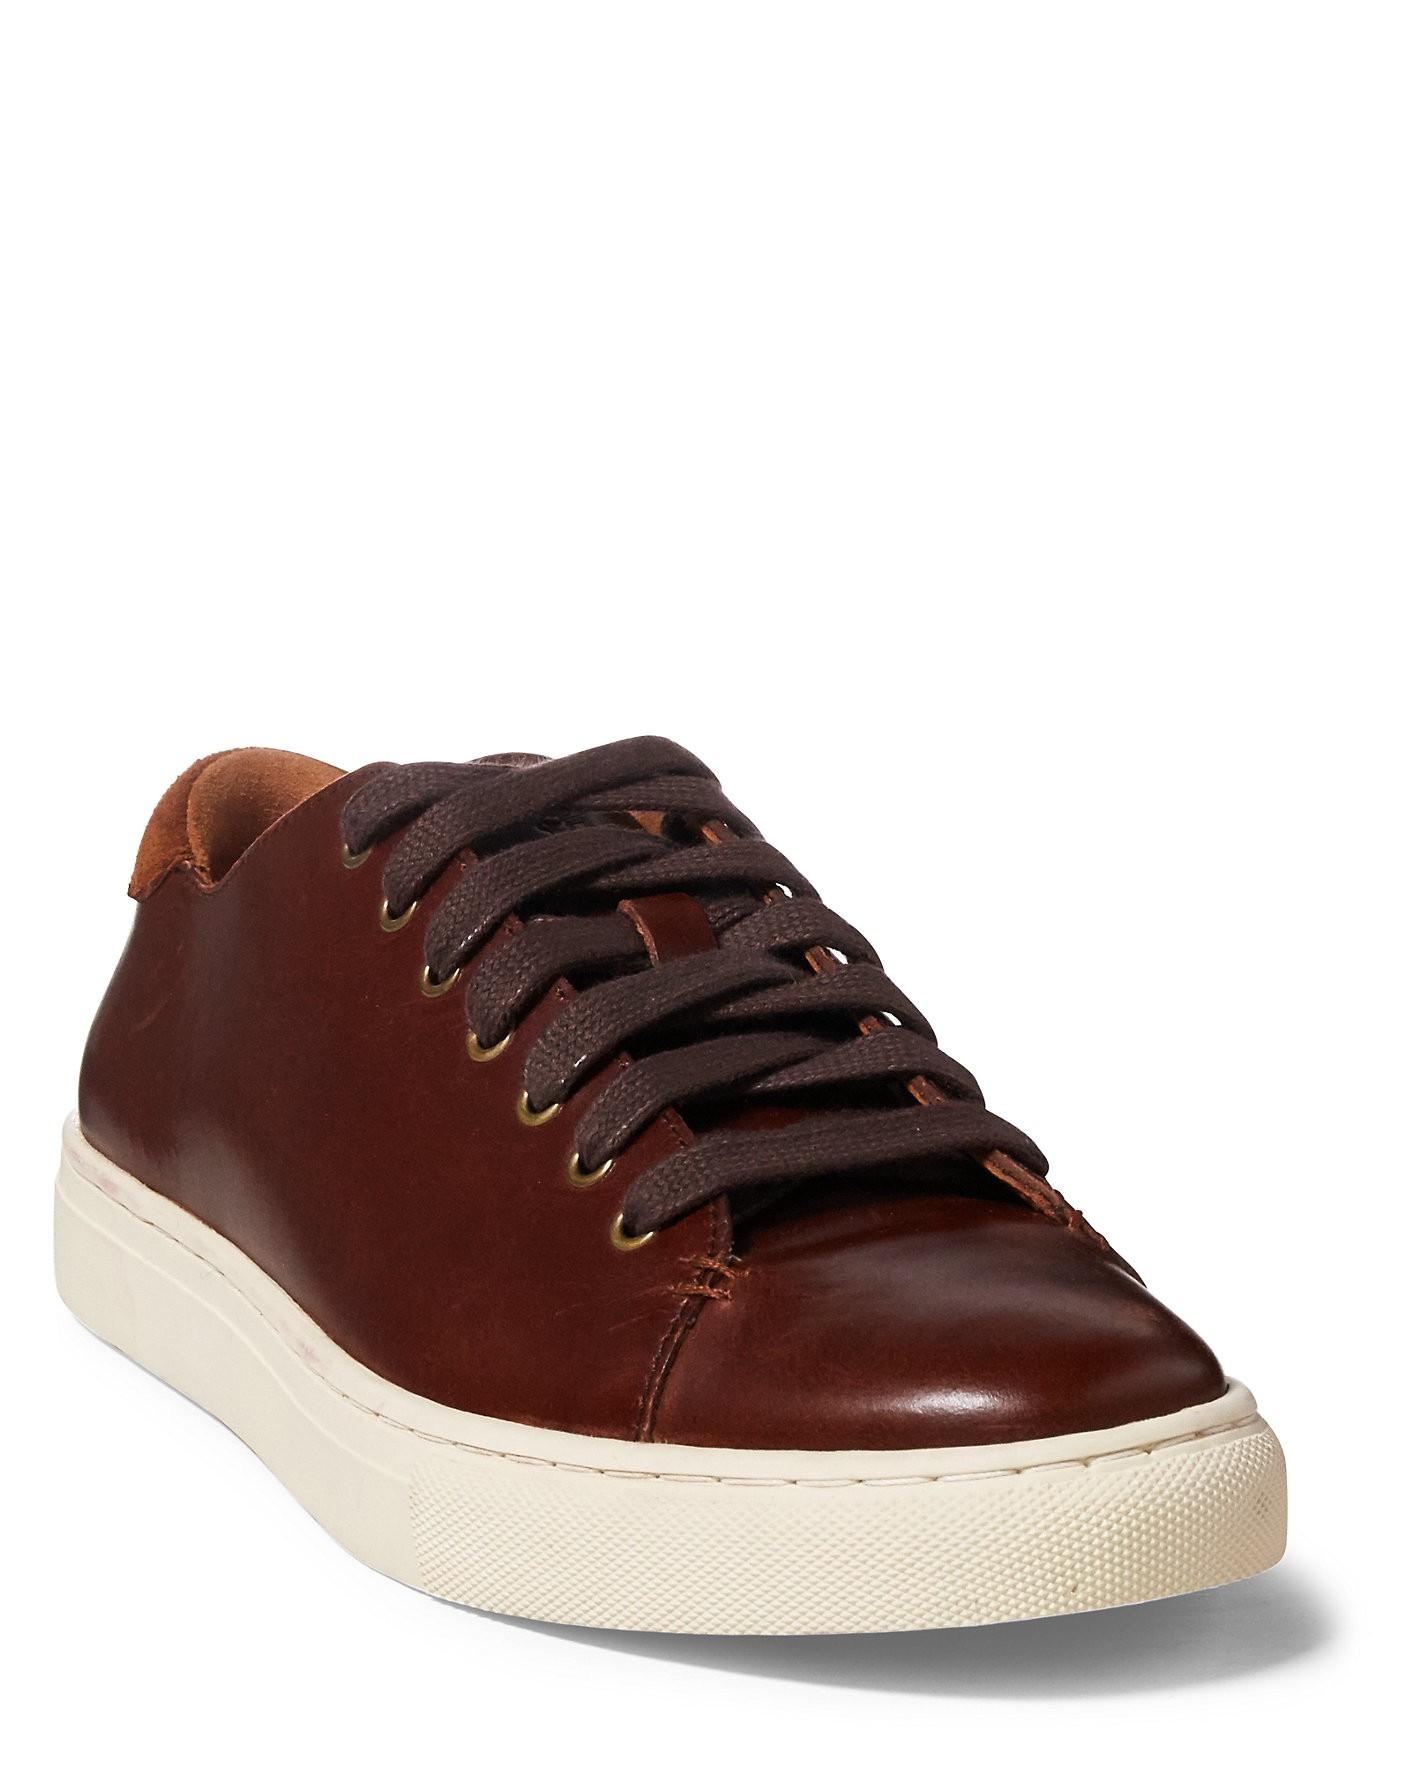 polo leather sneakers